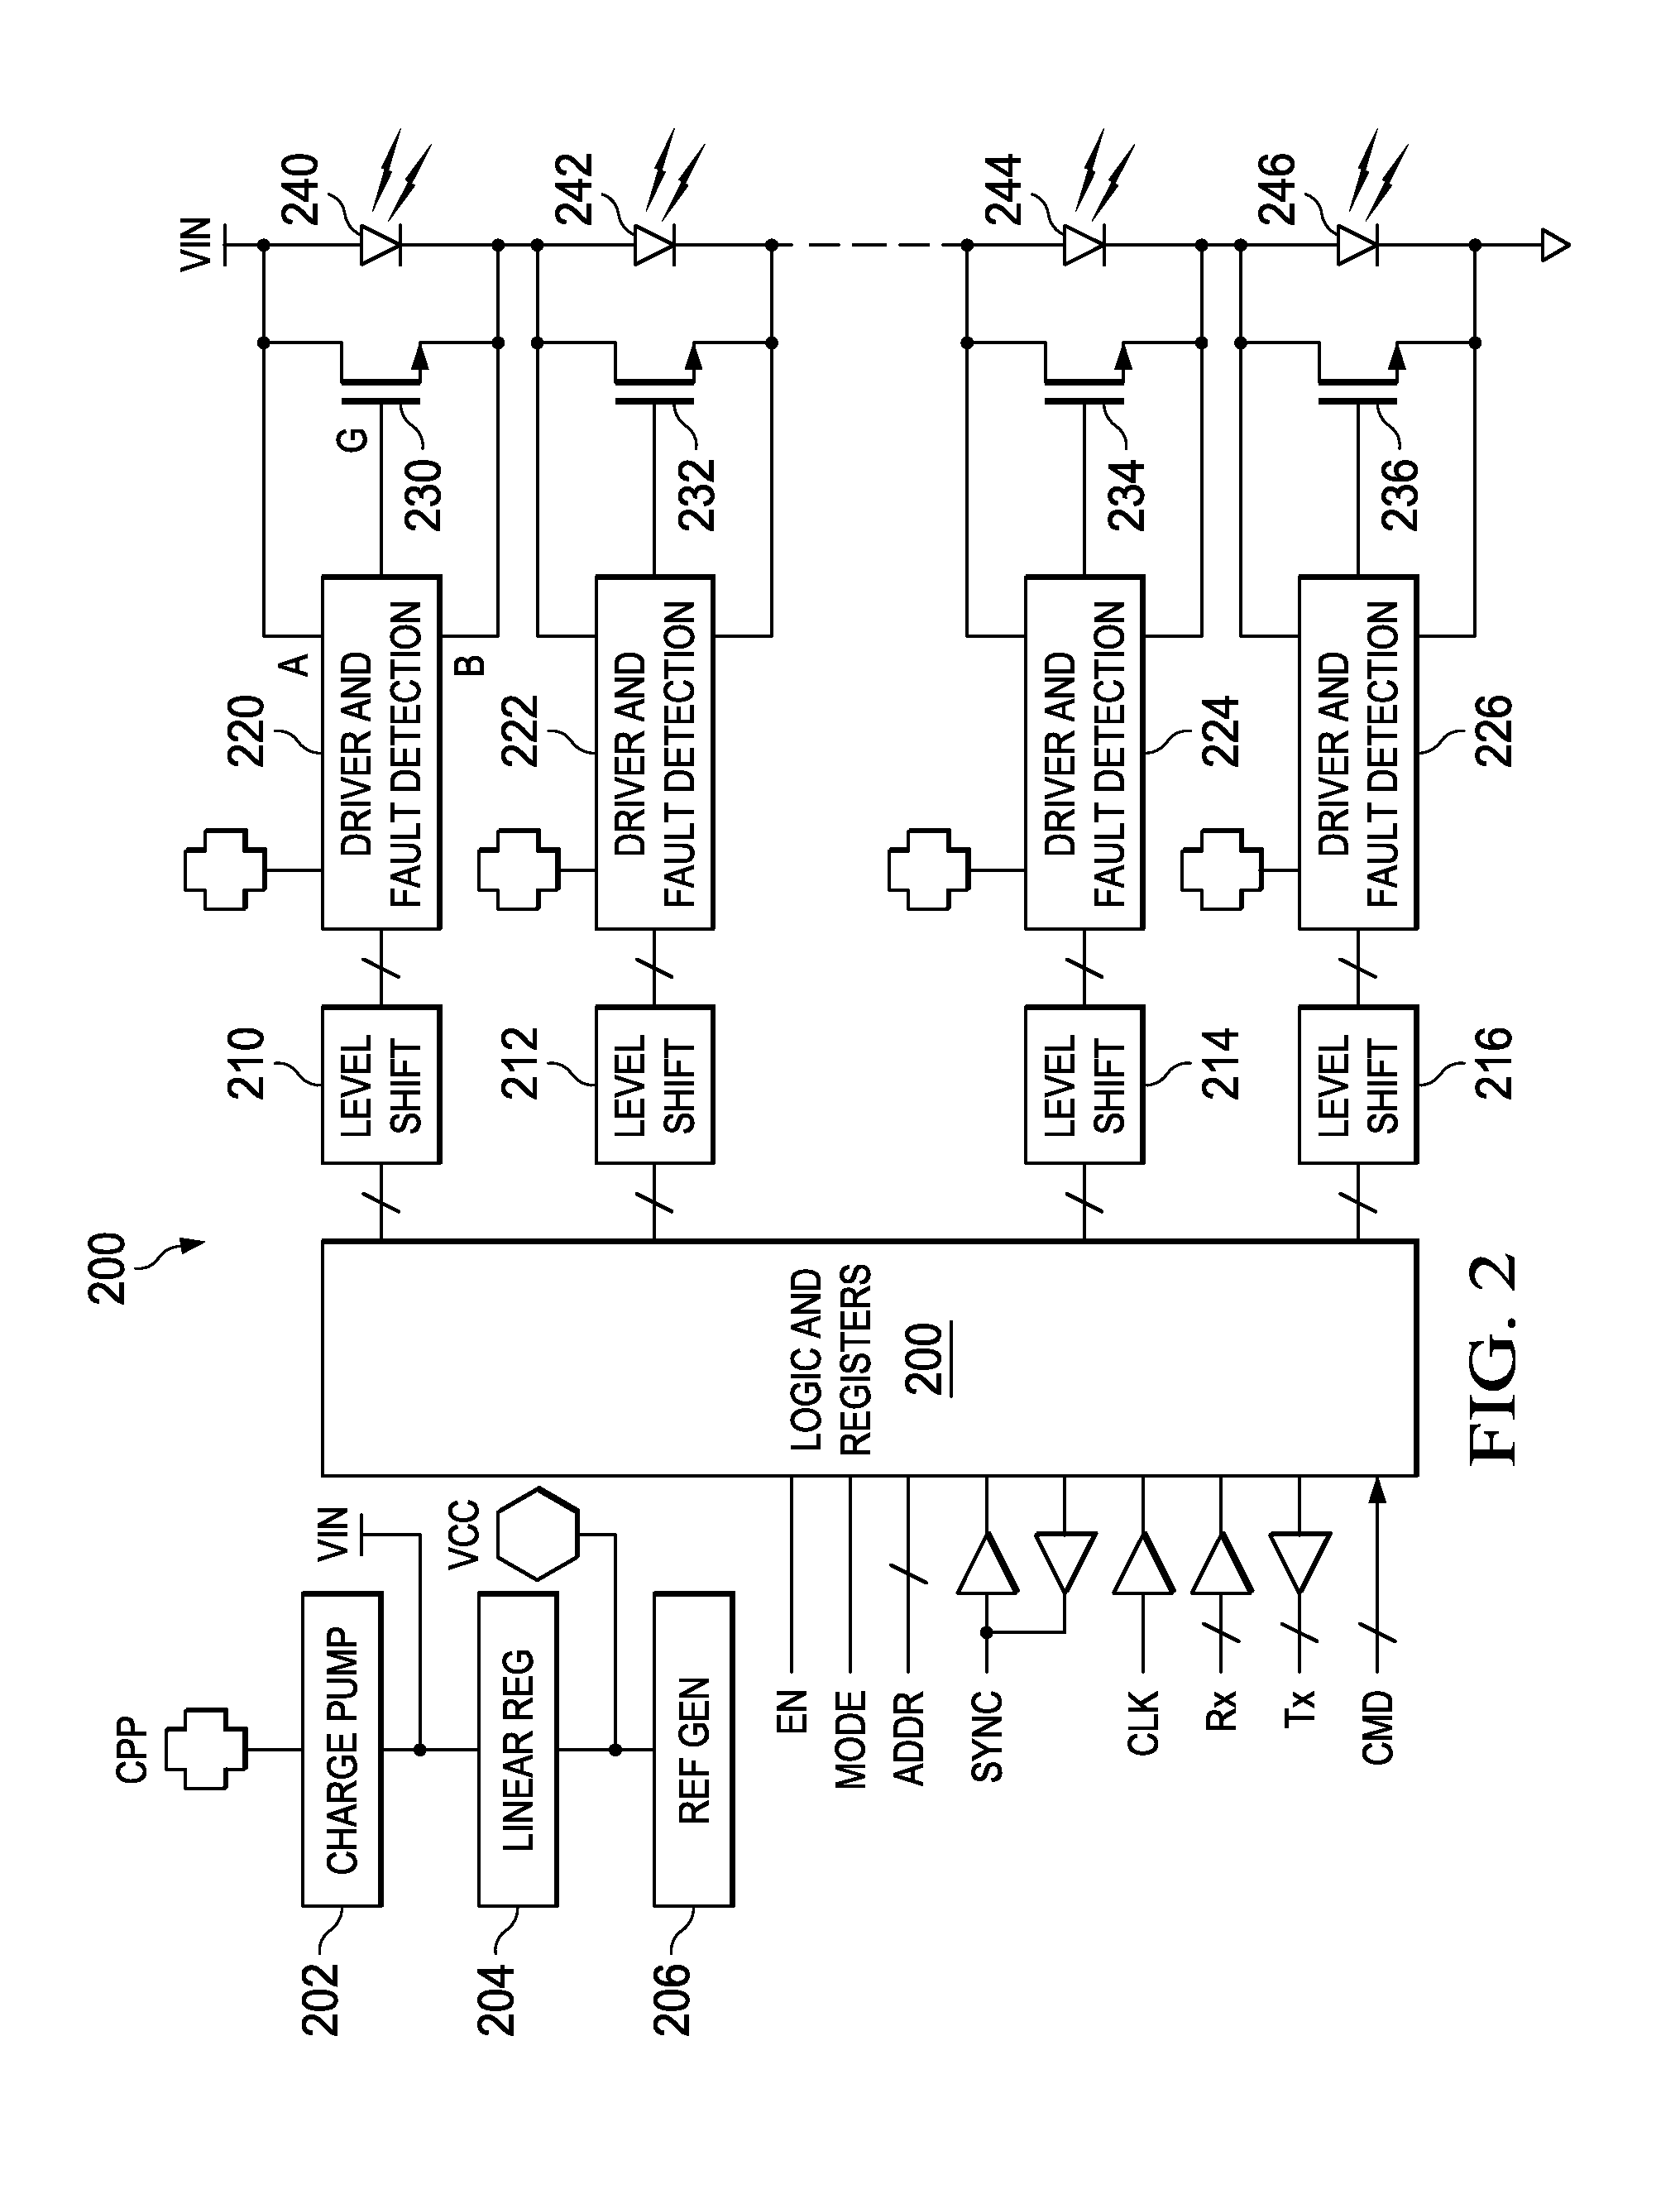 LED bypass and control circuit for fault tolerant LED systems